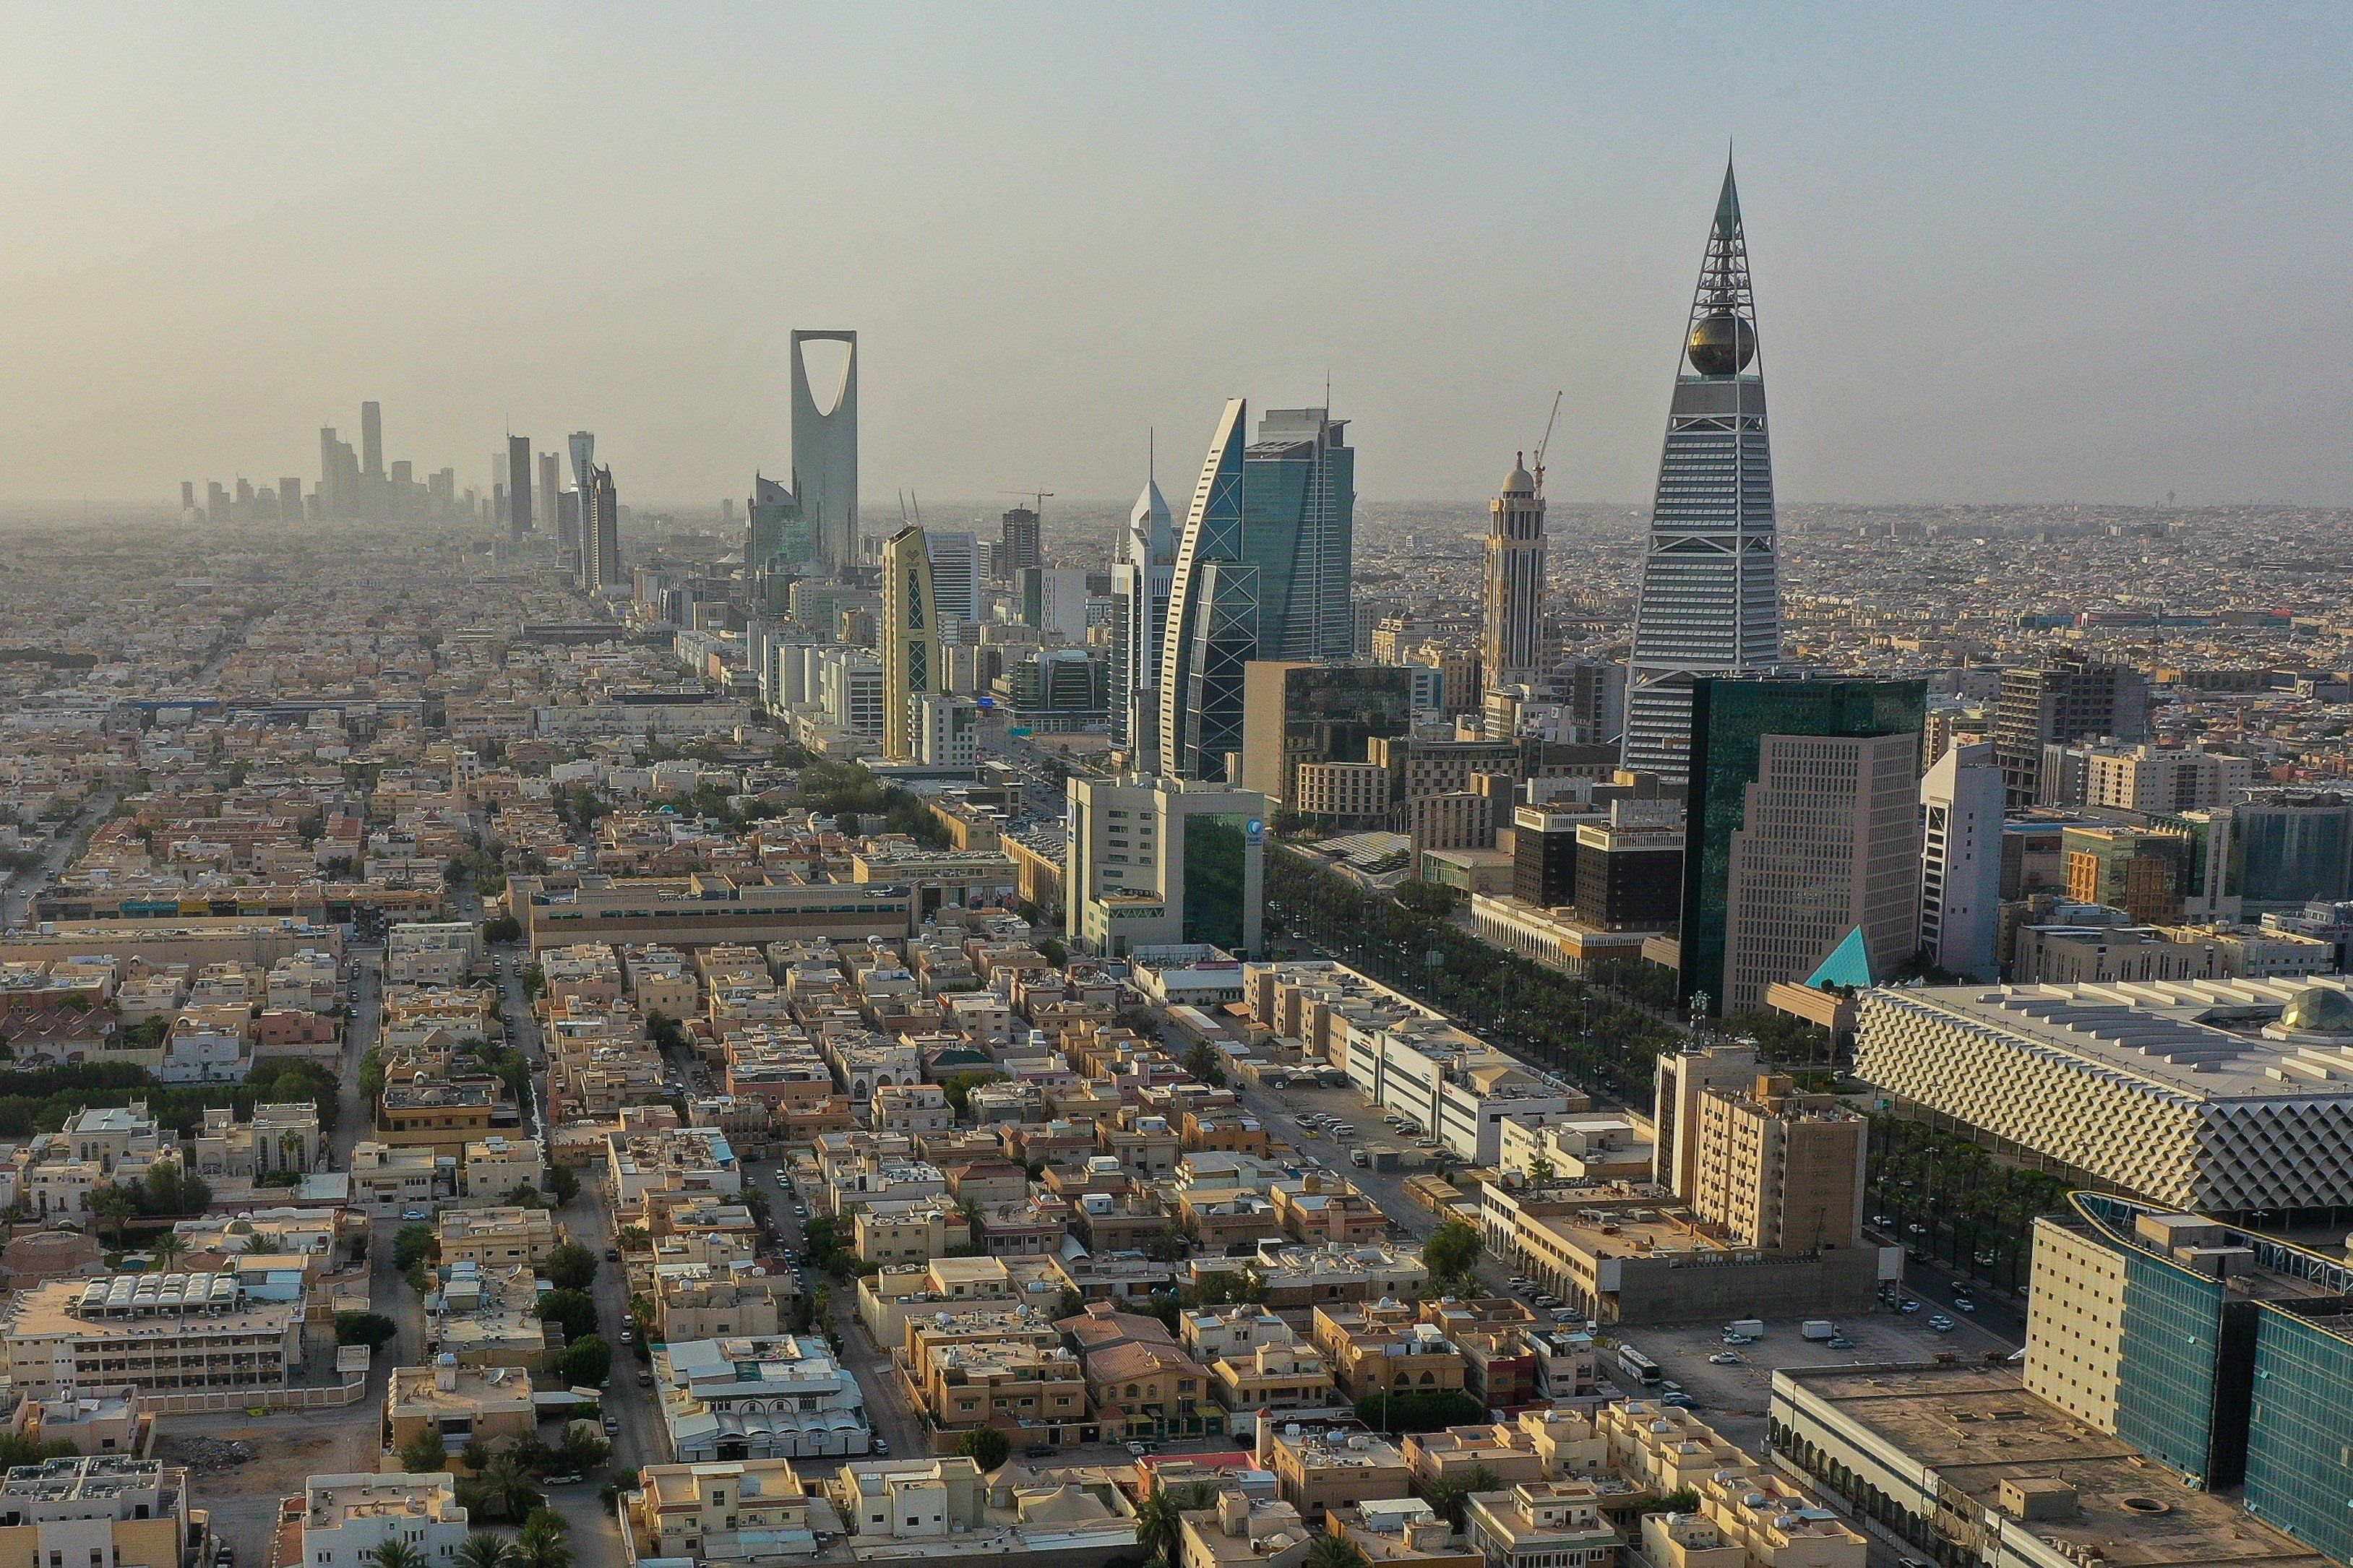 The Saudi market has grown in a very robust manner because it has a very strong domestic investor base, says a Goldman Sachs executive. Photo: Shutterstock